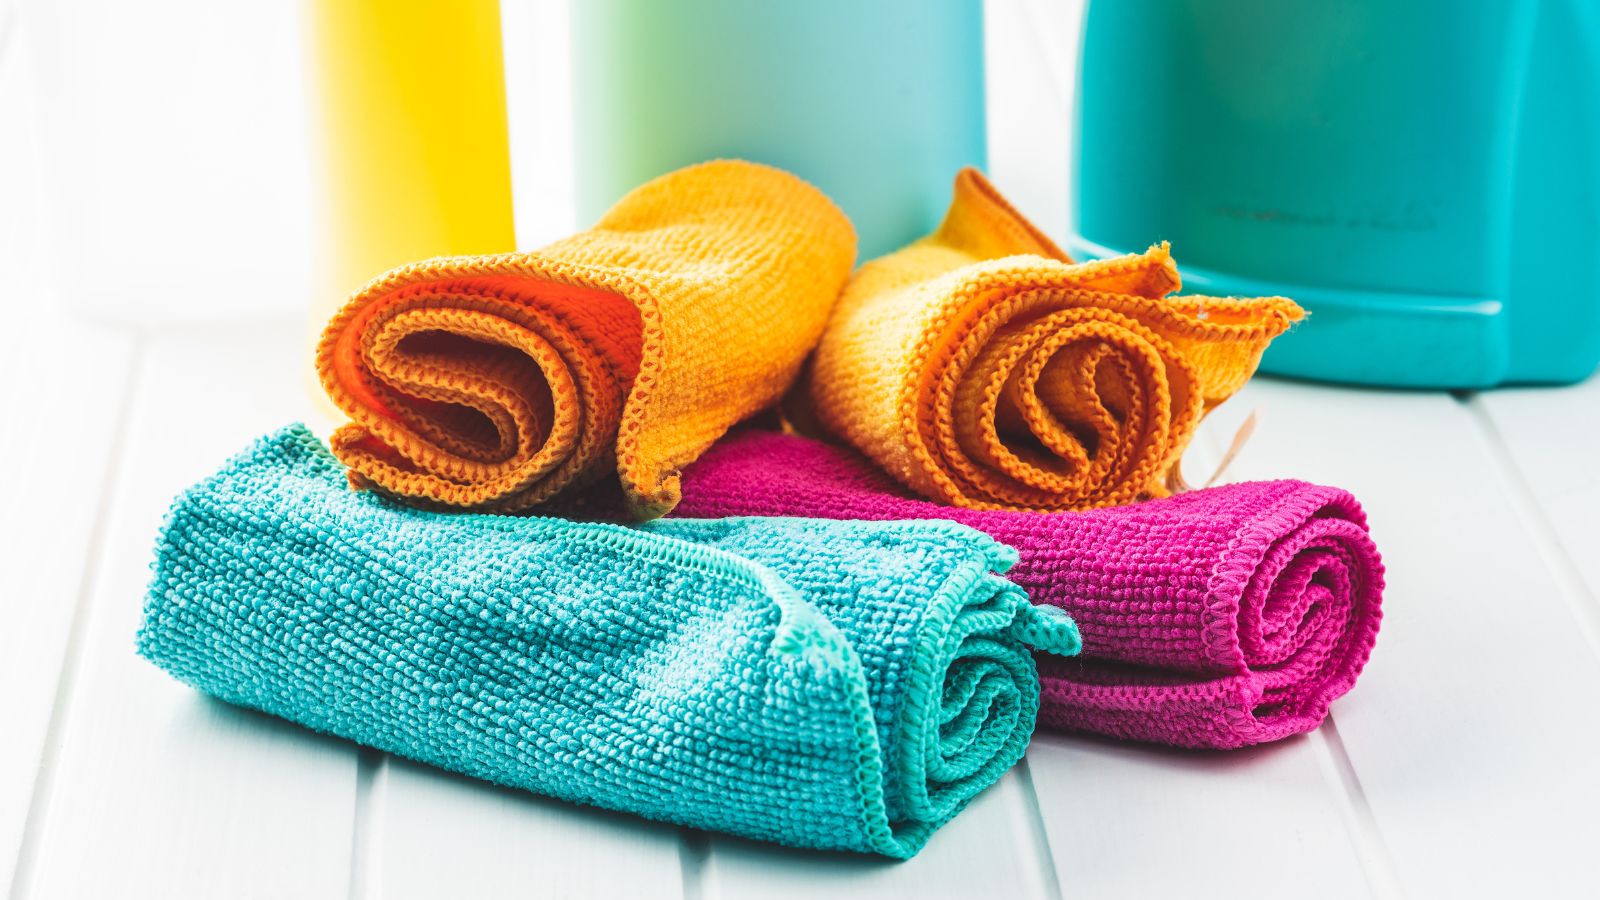 How to Wash and Clean Microfiber Cloths